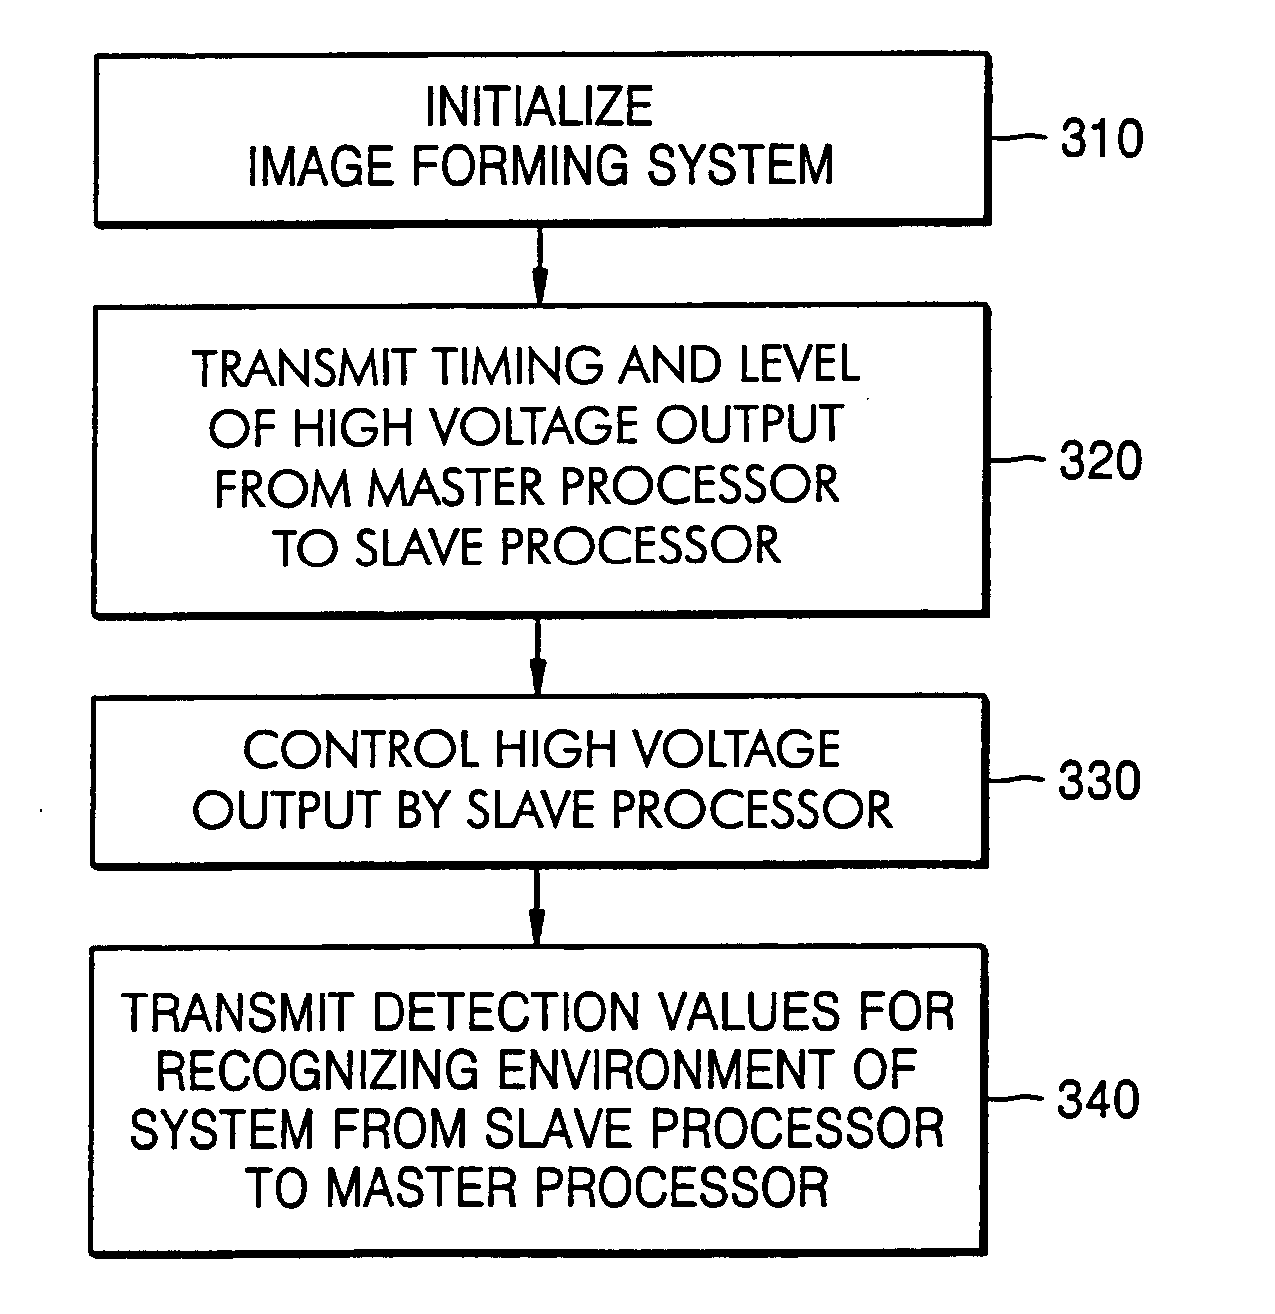 Method and apparatus for controlling high-voltage output in image forming system